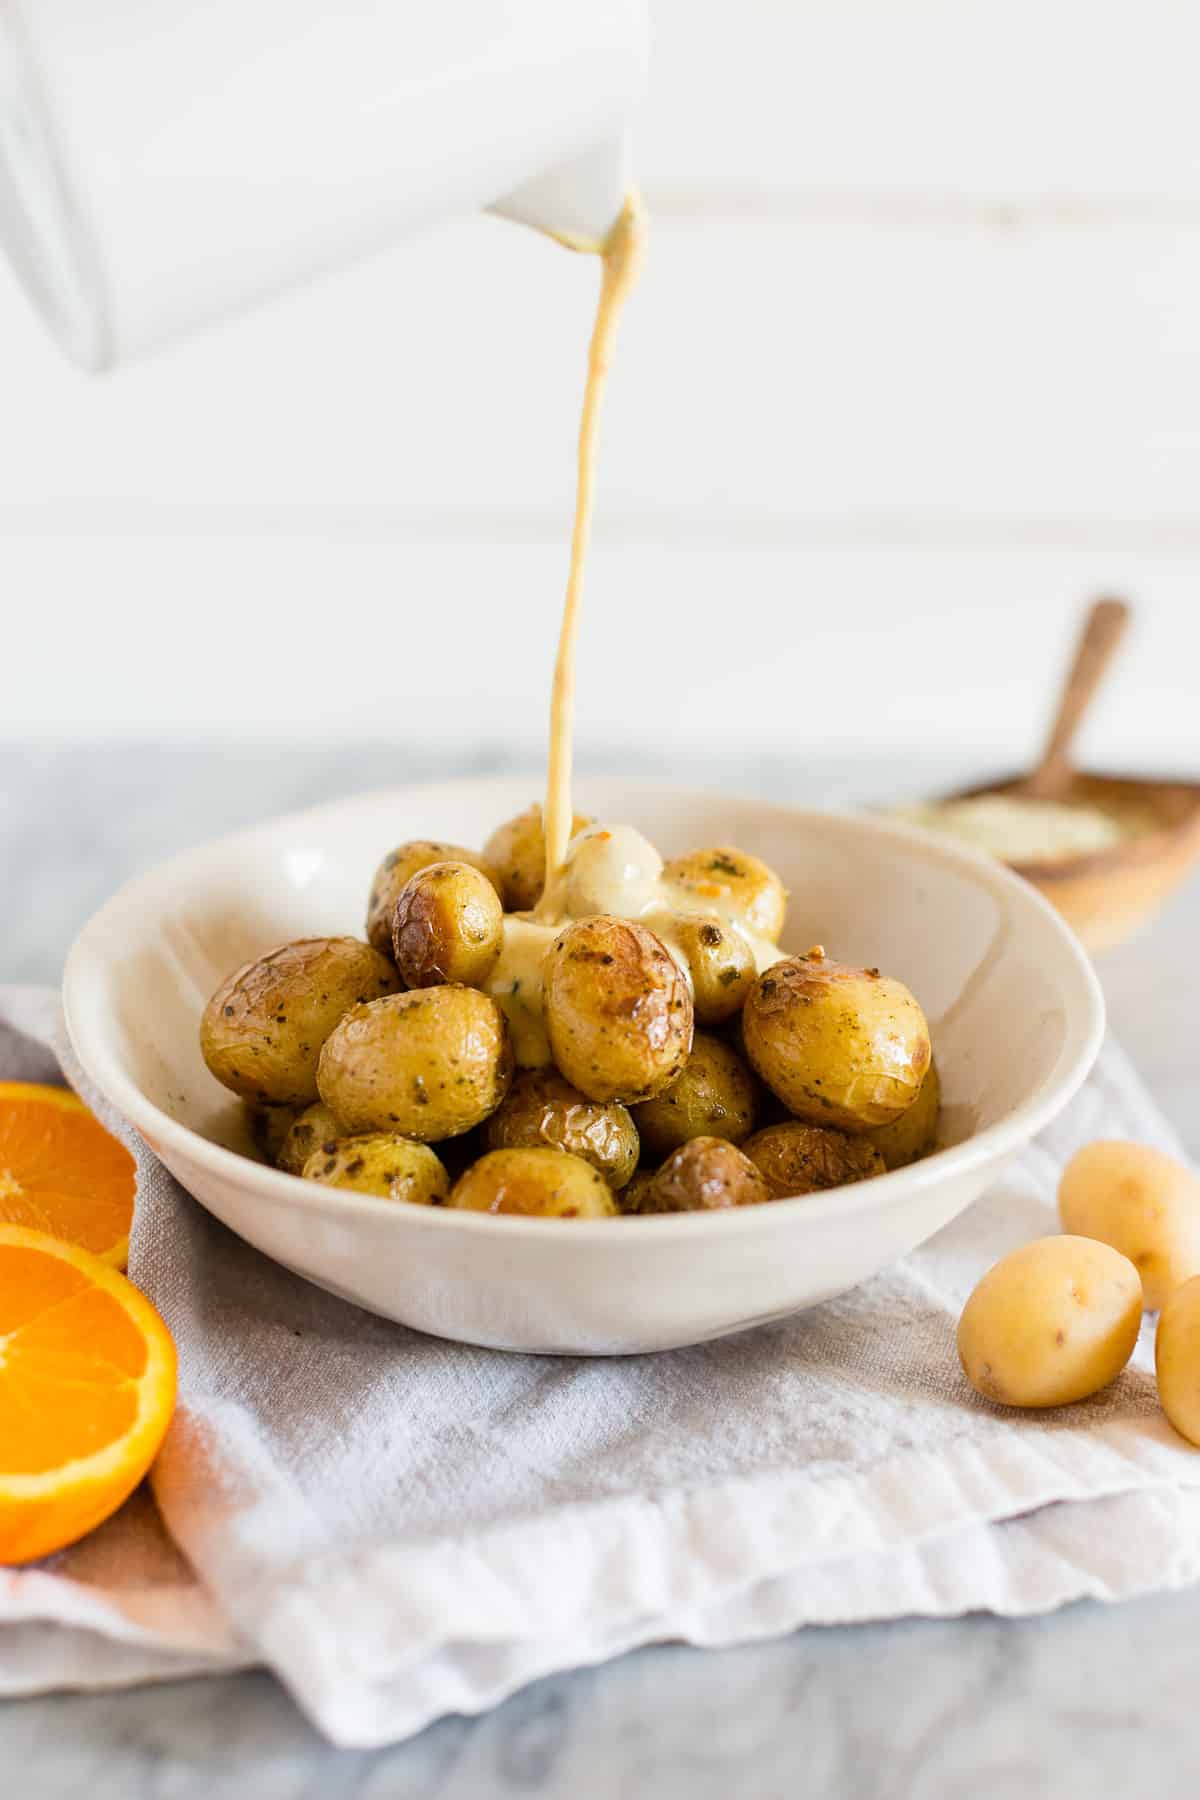 Pouring orange Dijon dressing over Onion & Chive Oven | Grill Ready Little Potatoes.